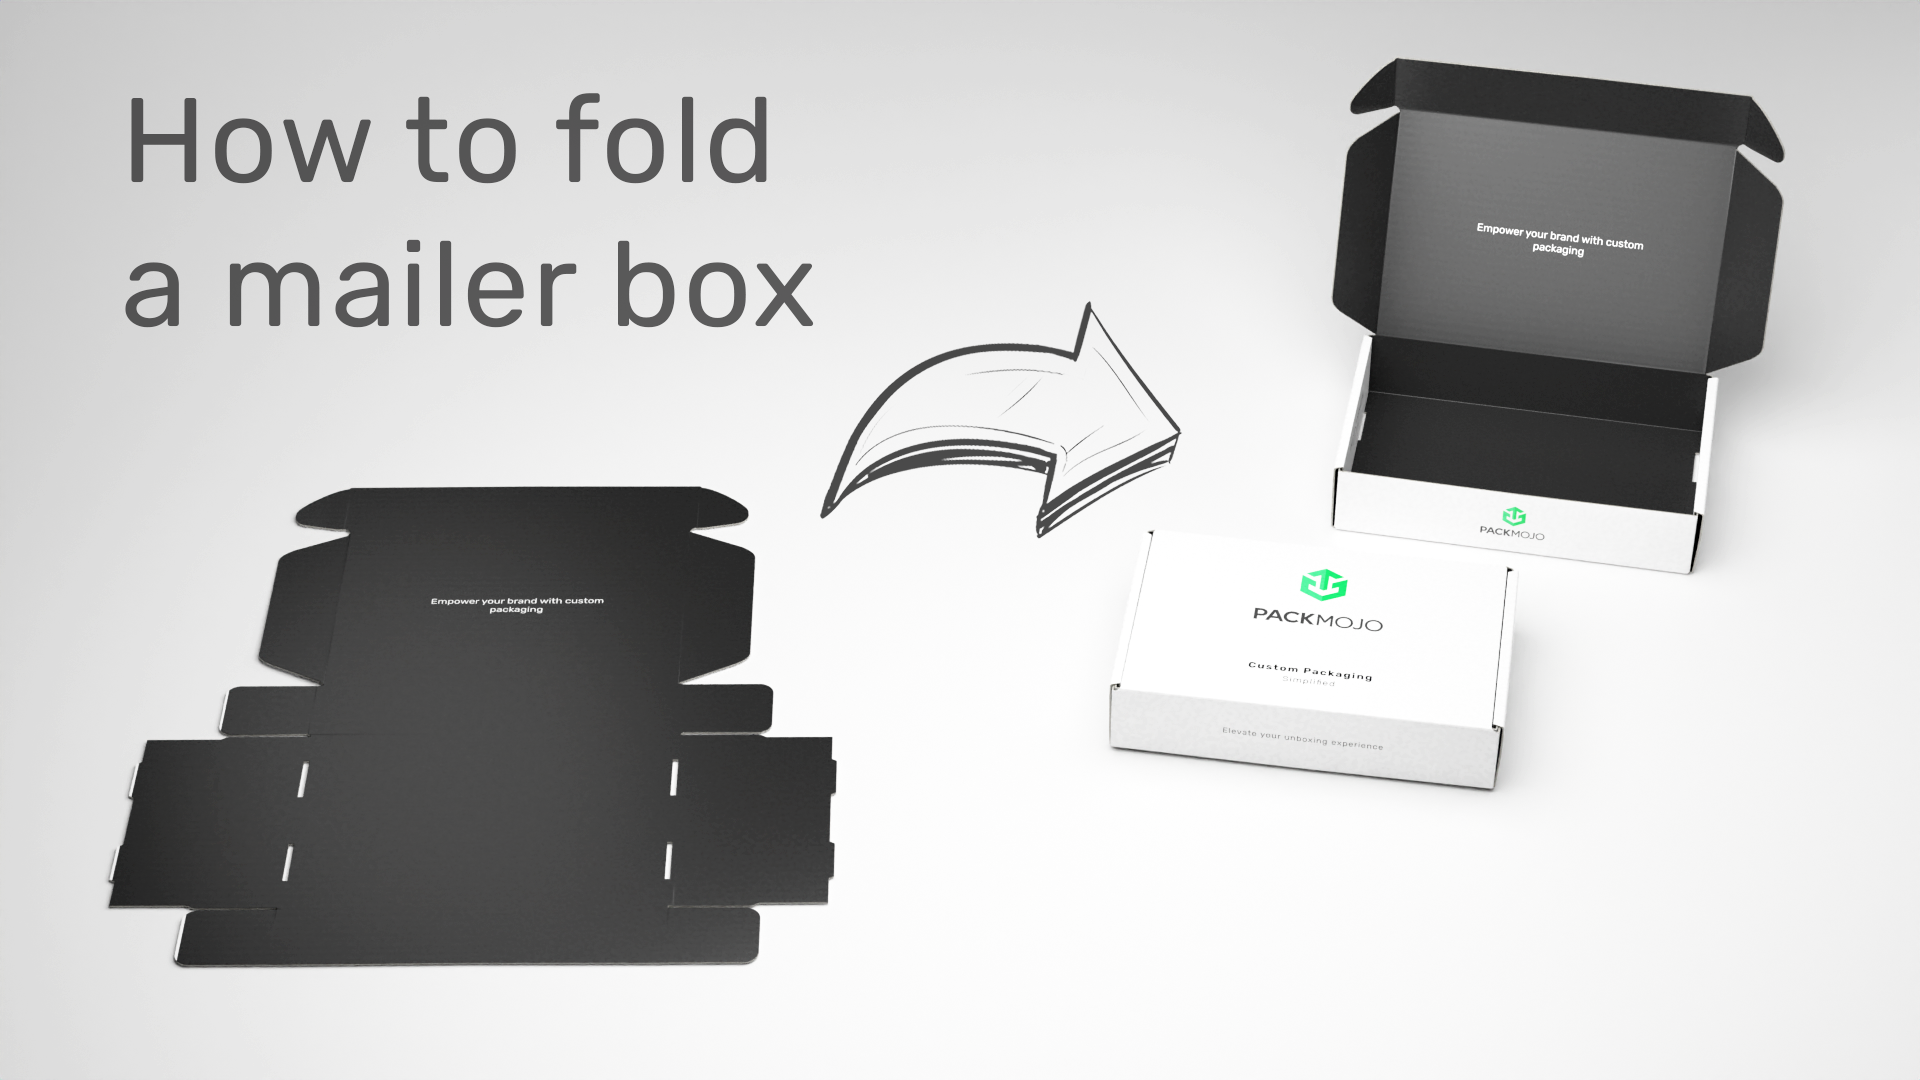 How to fold a mailer box